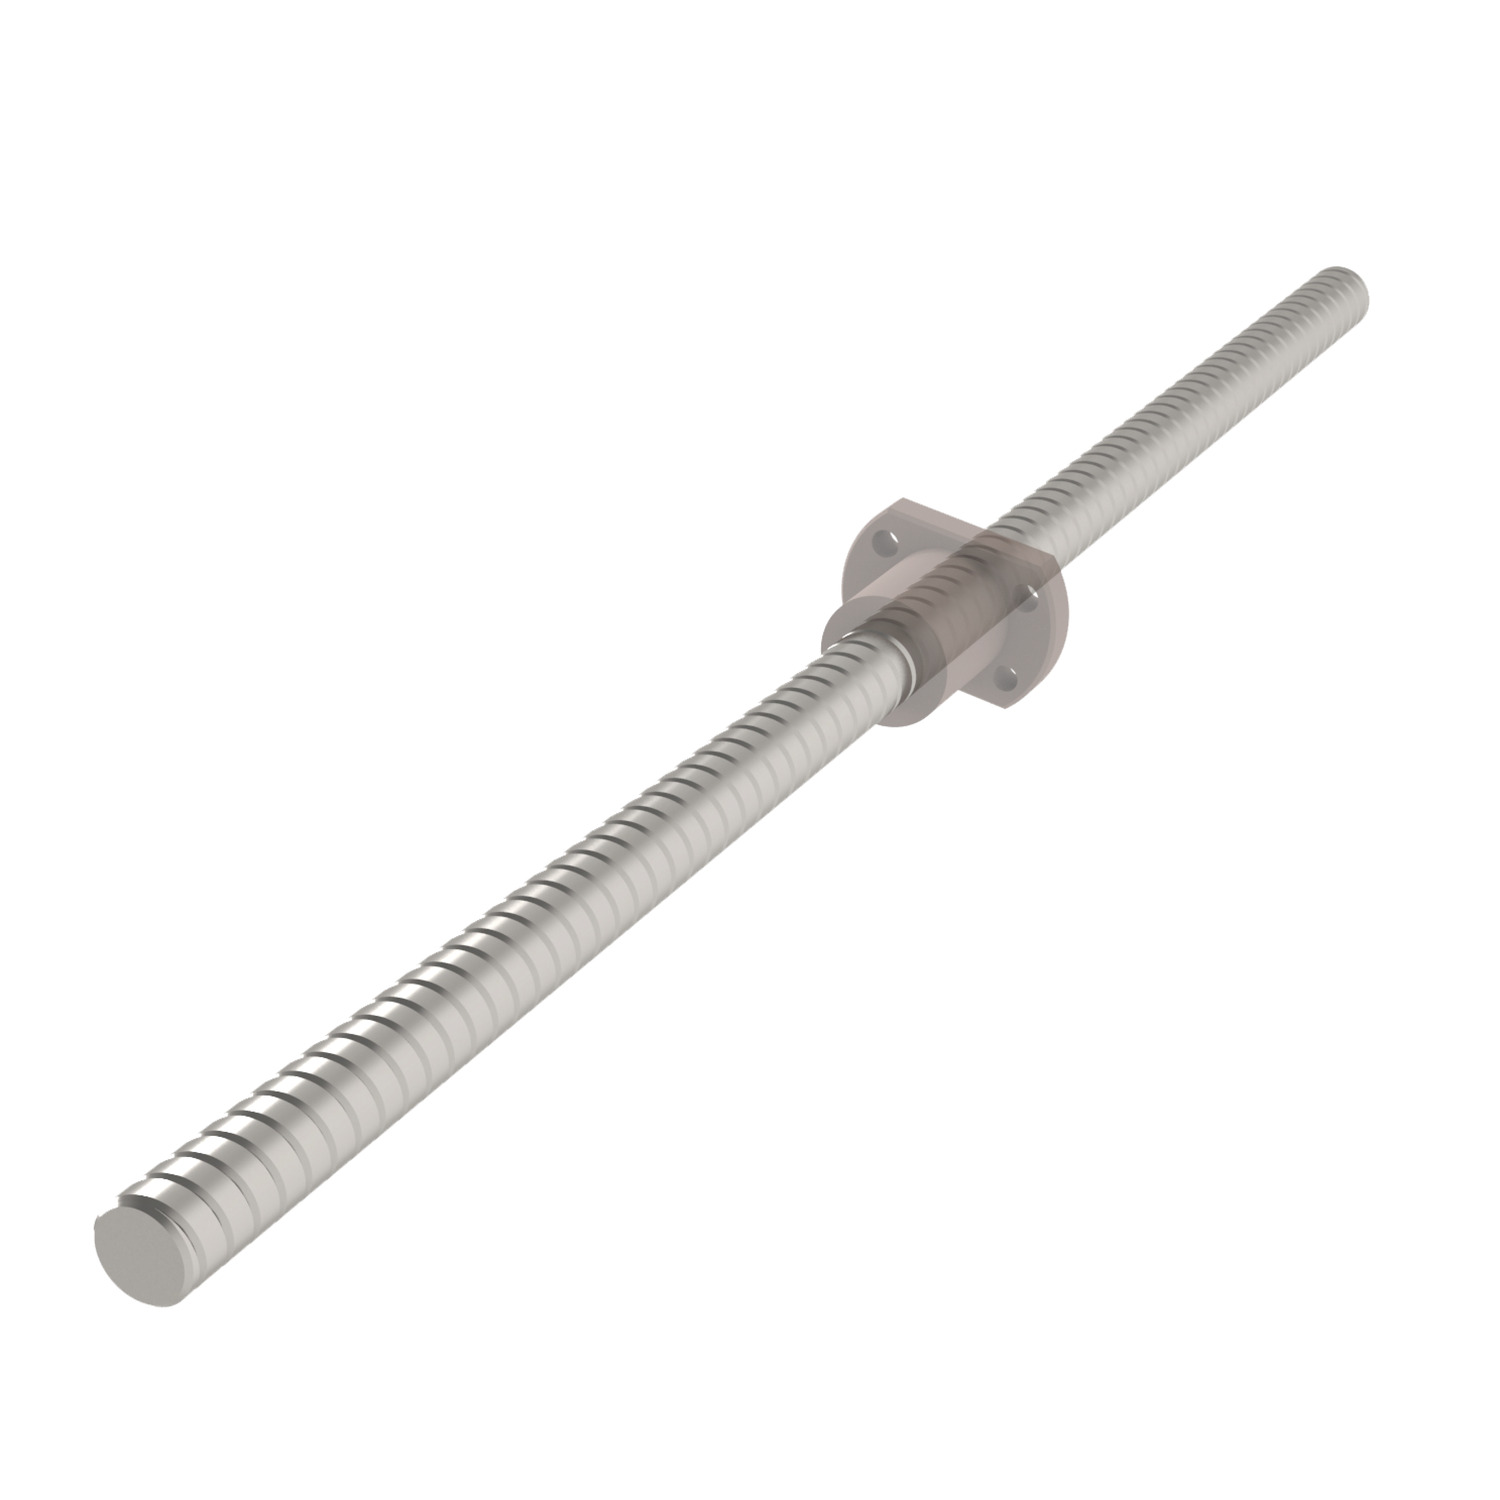 L1349 - High Helix Lead Screws - Stainless